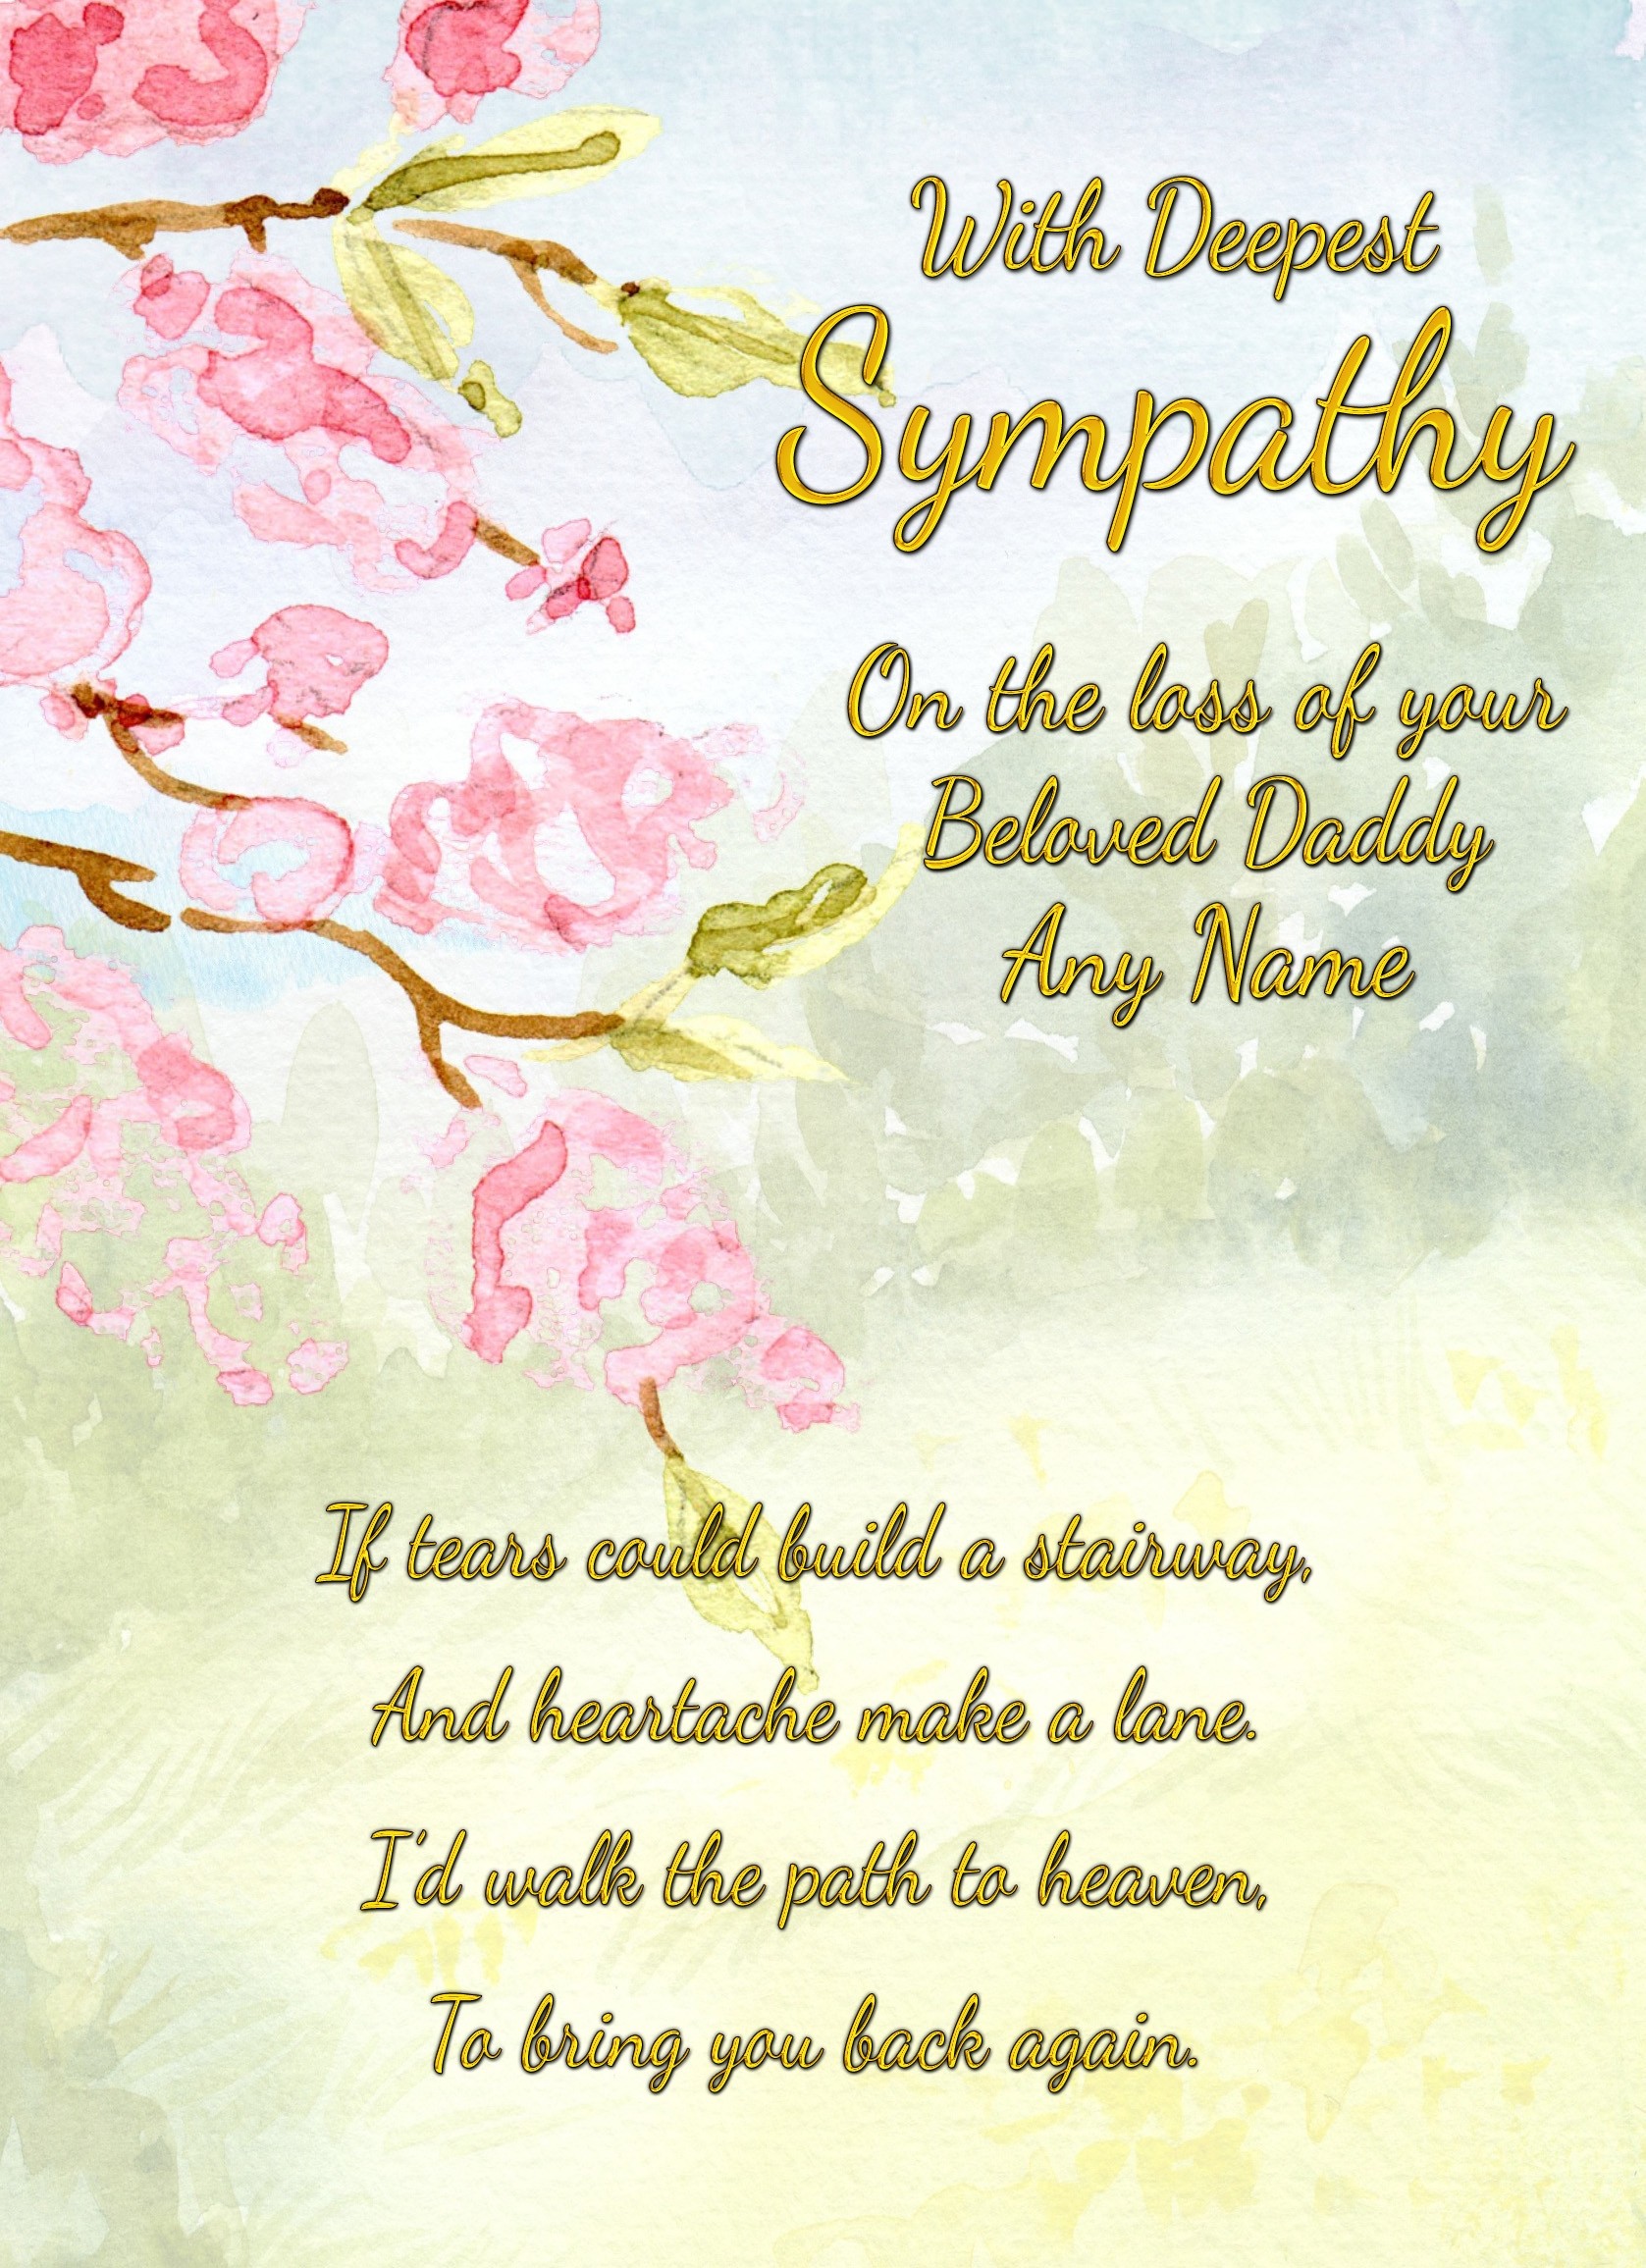 Personalised Sympathy Bereavement Card (With Deepest Sympathy, Beloved Daddy)